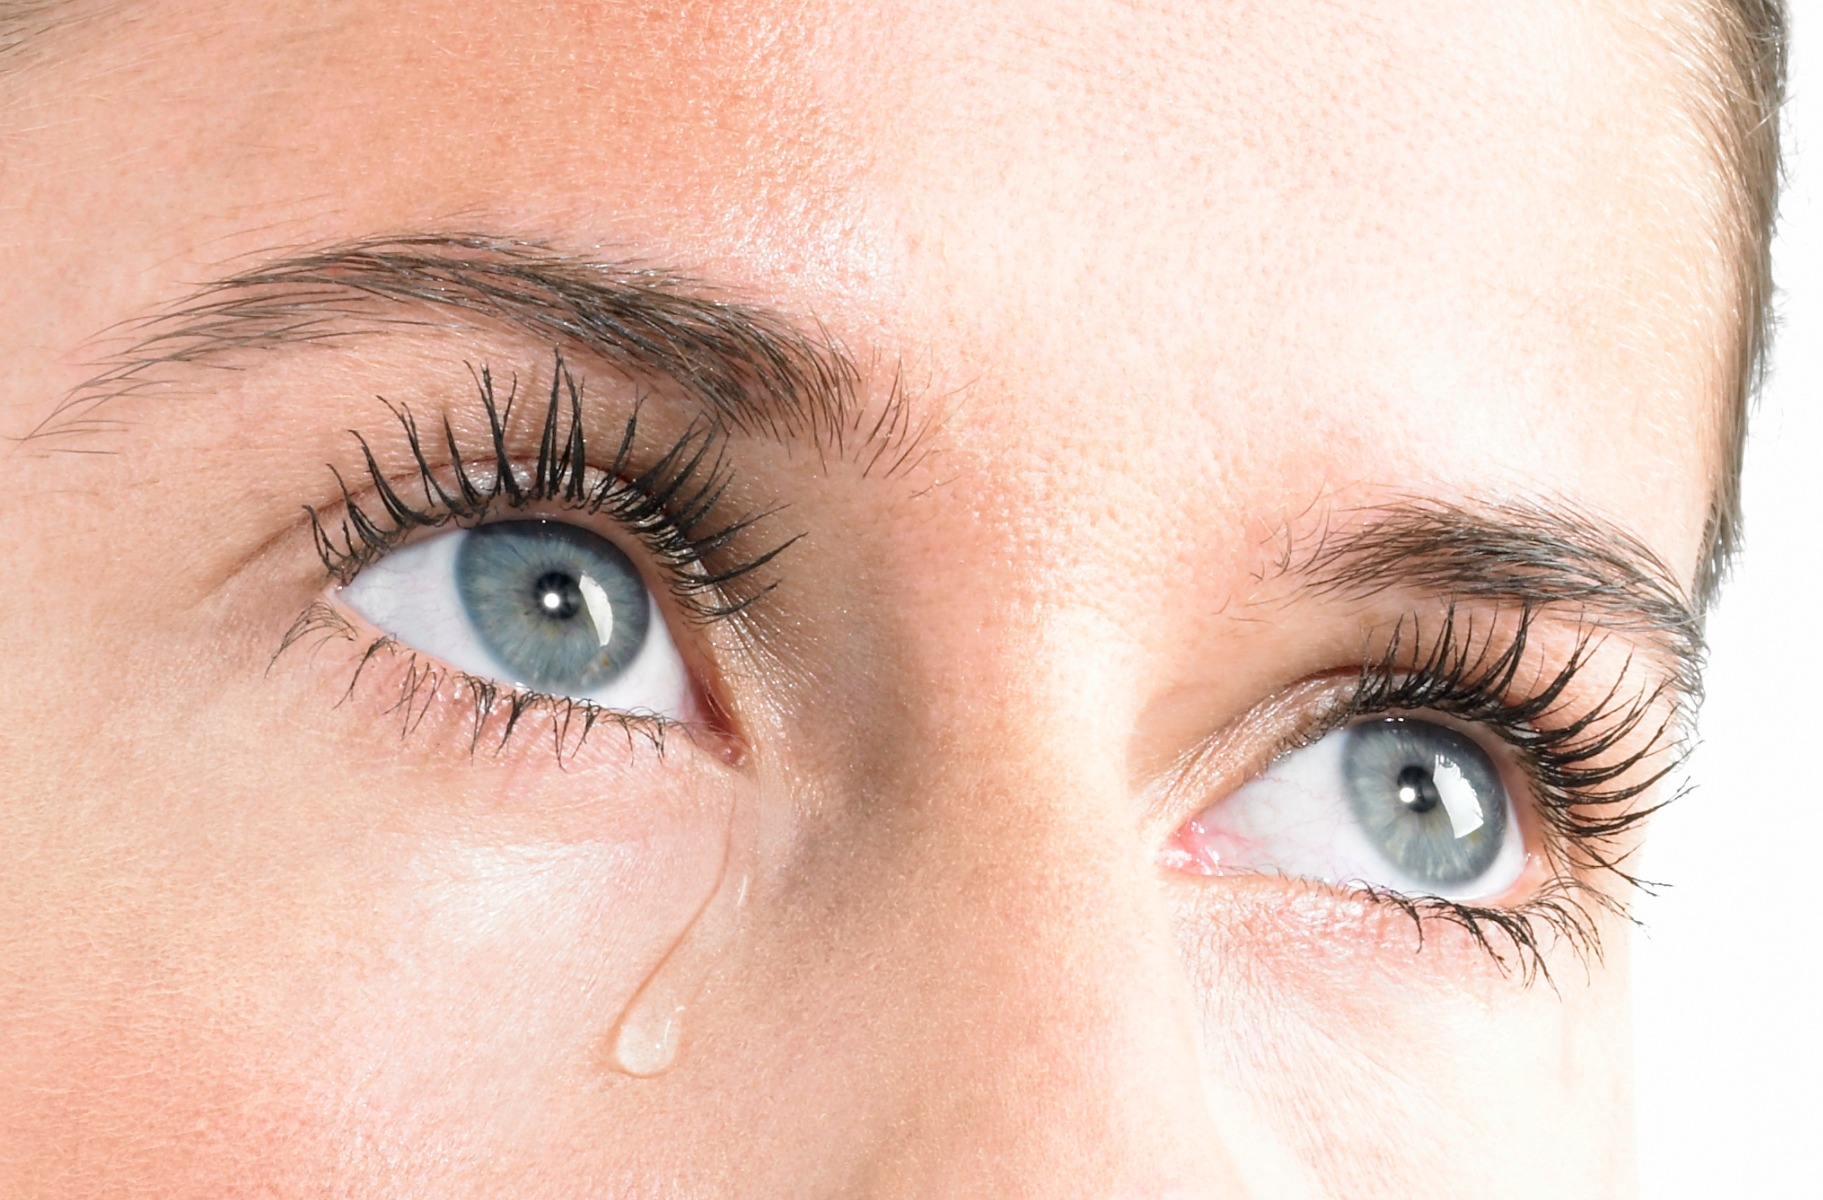 Blepharitis: what it is, what causes it and how to treat it